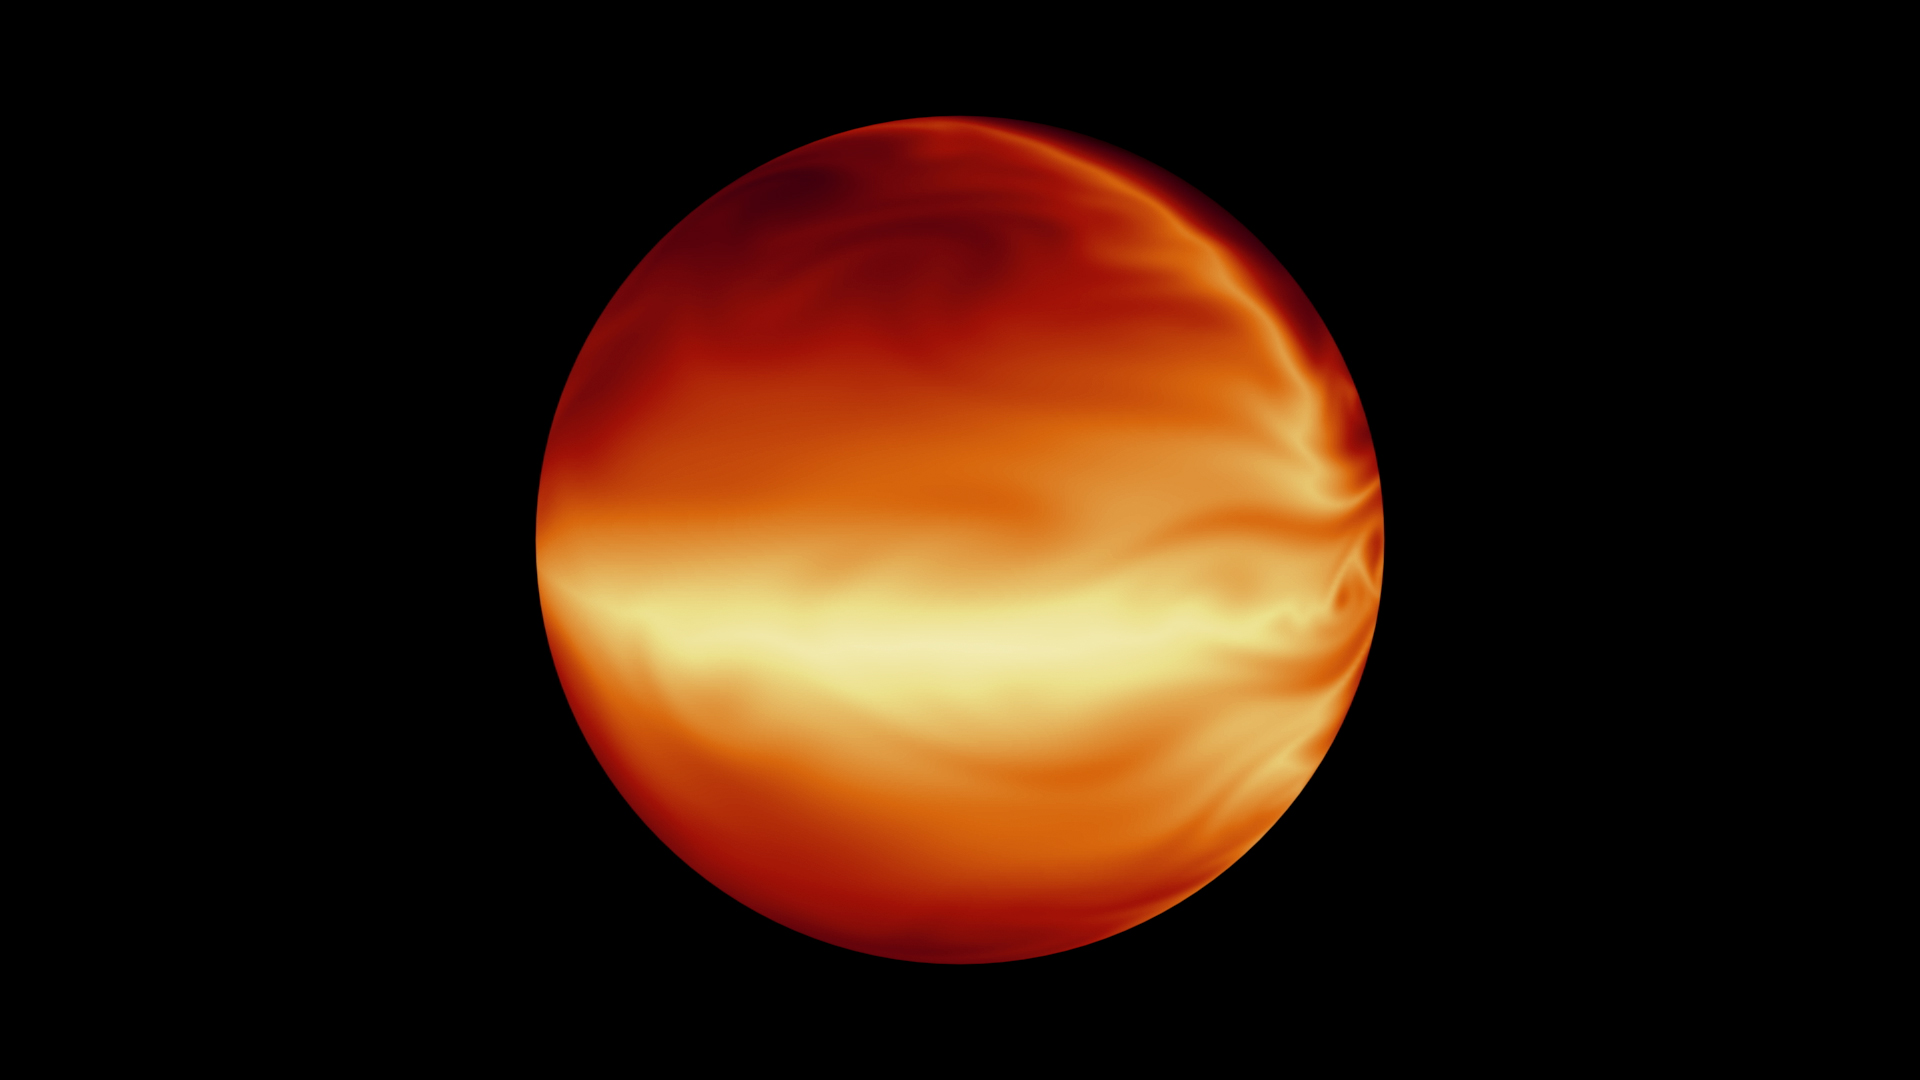 A simulation showing the turbulent atmosphere of exoplanet HD 80606b, based on data that were gathered with the Spitzer space telescope. This hot Jupiter-type world has one of the most elongated orbits known for an exoplanet, one that resembles the orbits of comets in our Solar System. Image Credit: NASA/JPL-Caltech/MIT/Principia College